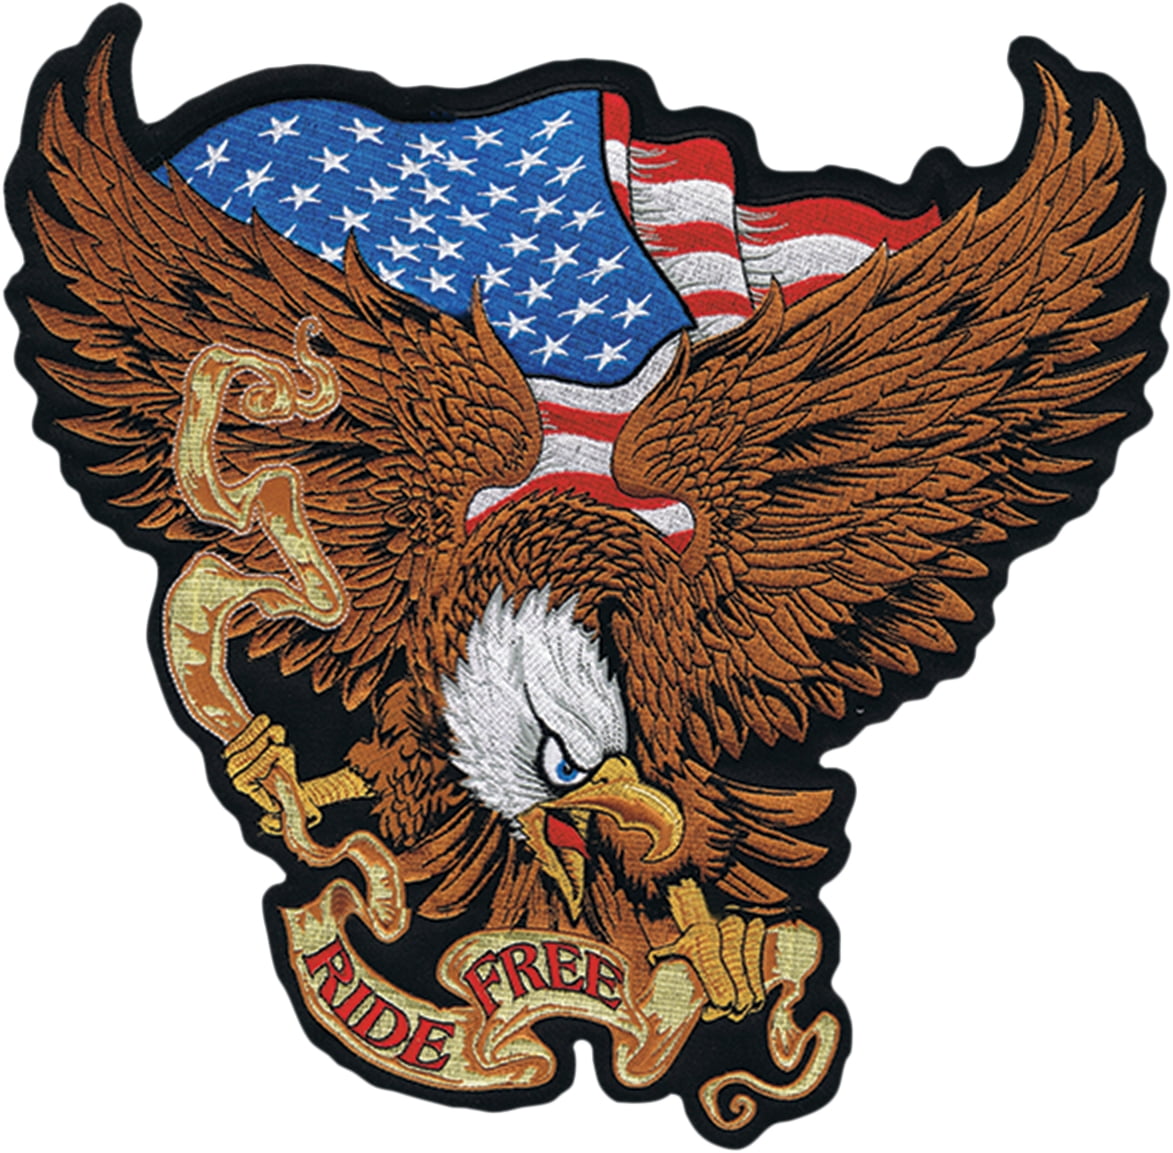 Lethal Threat Embroidered Patch Fire Eagle Iron On Sew On 